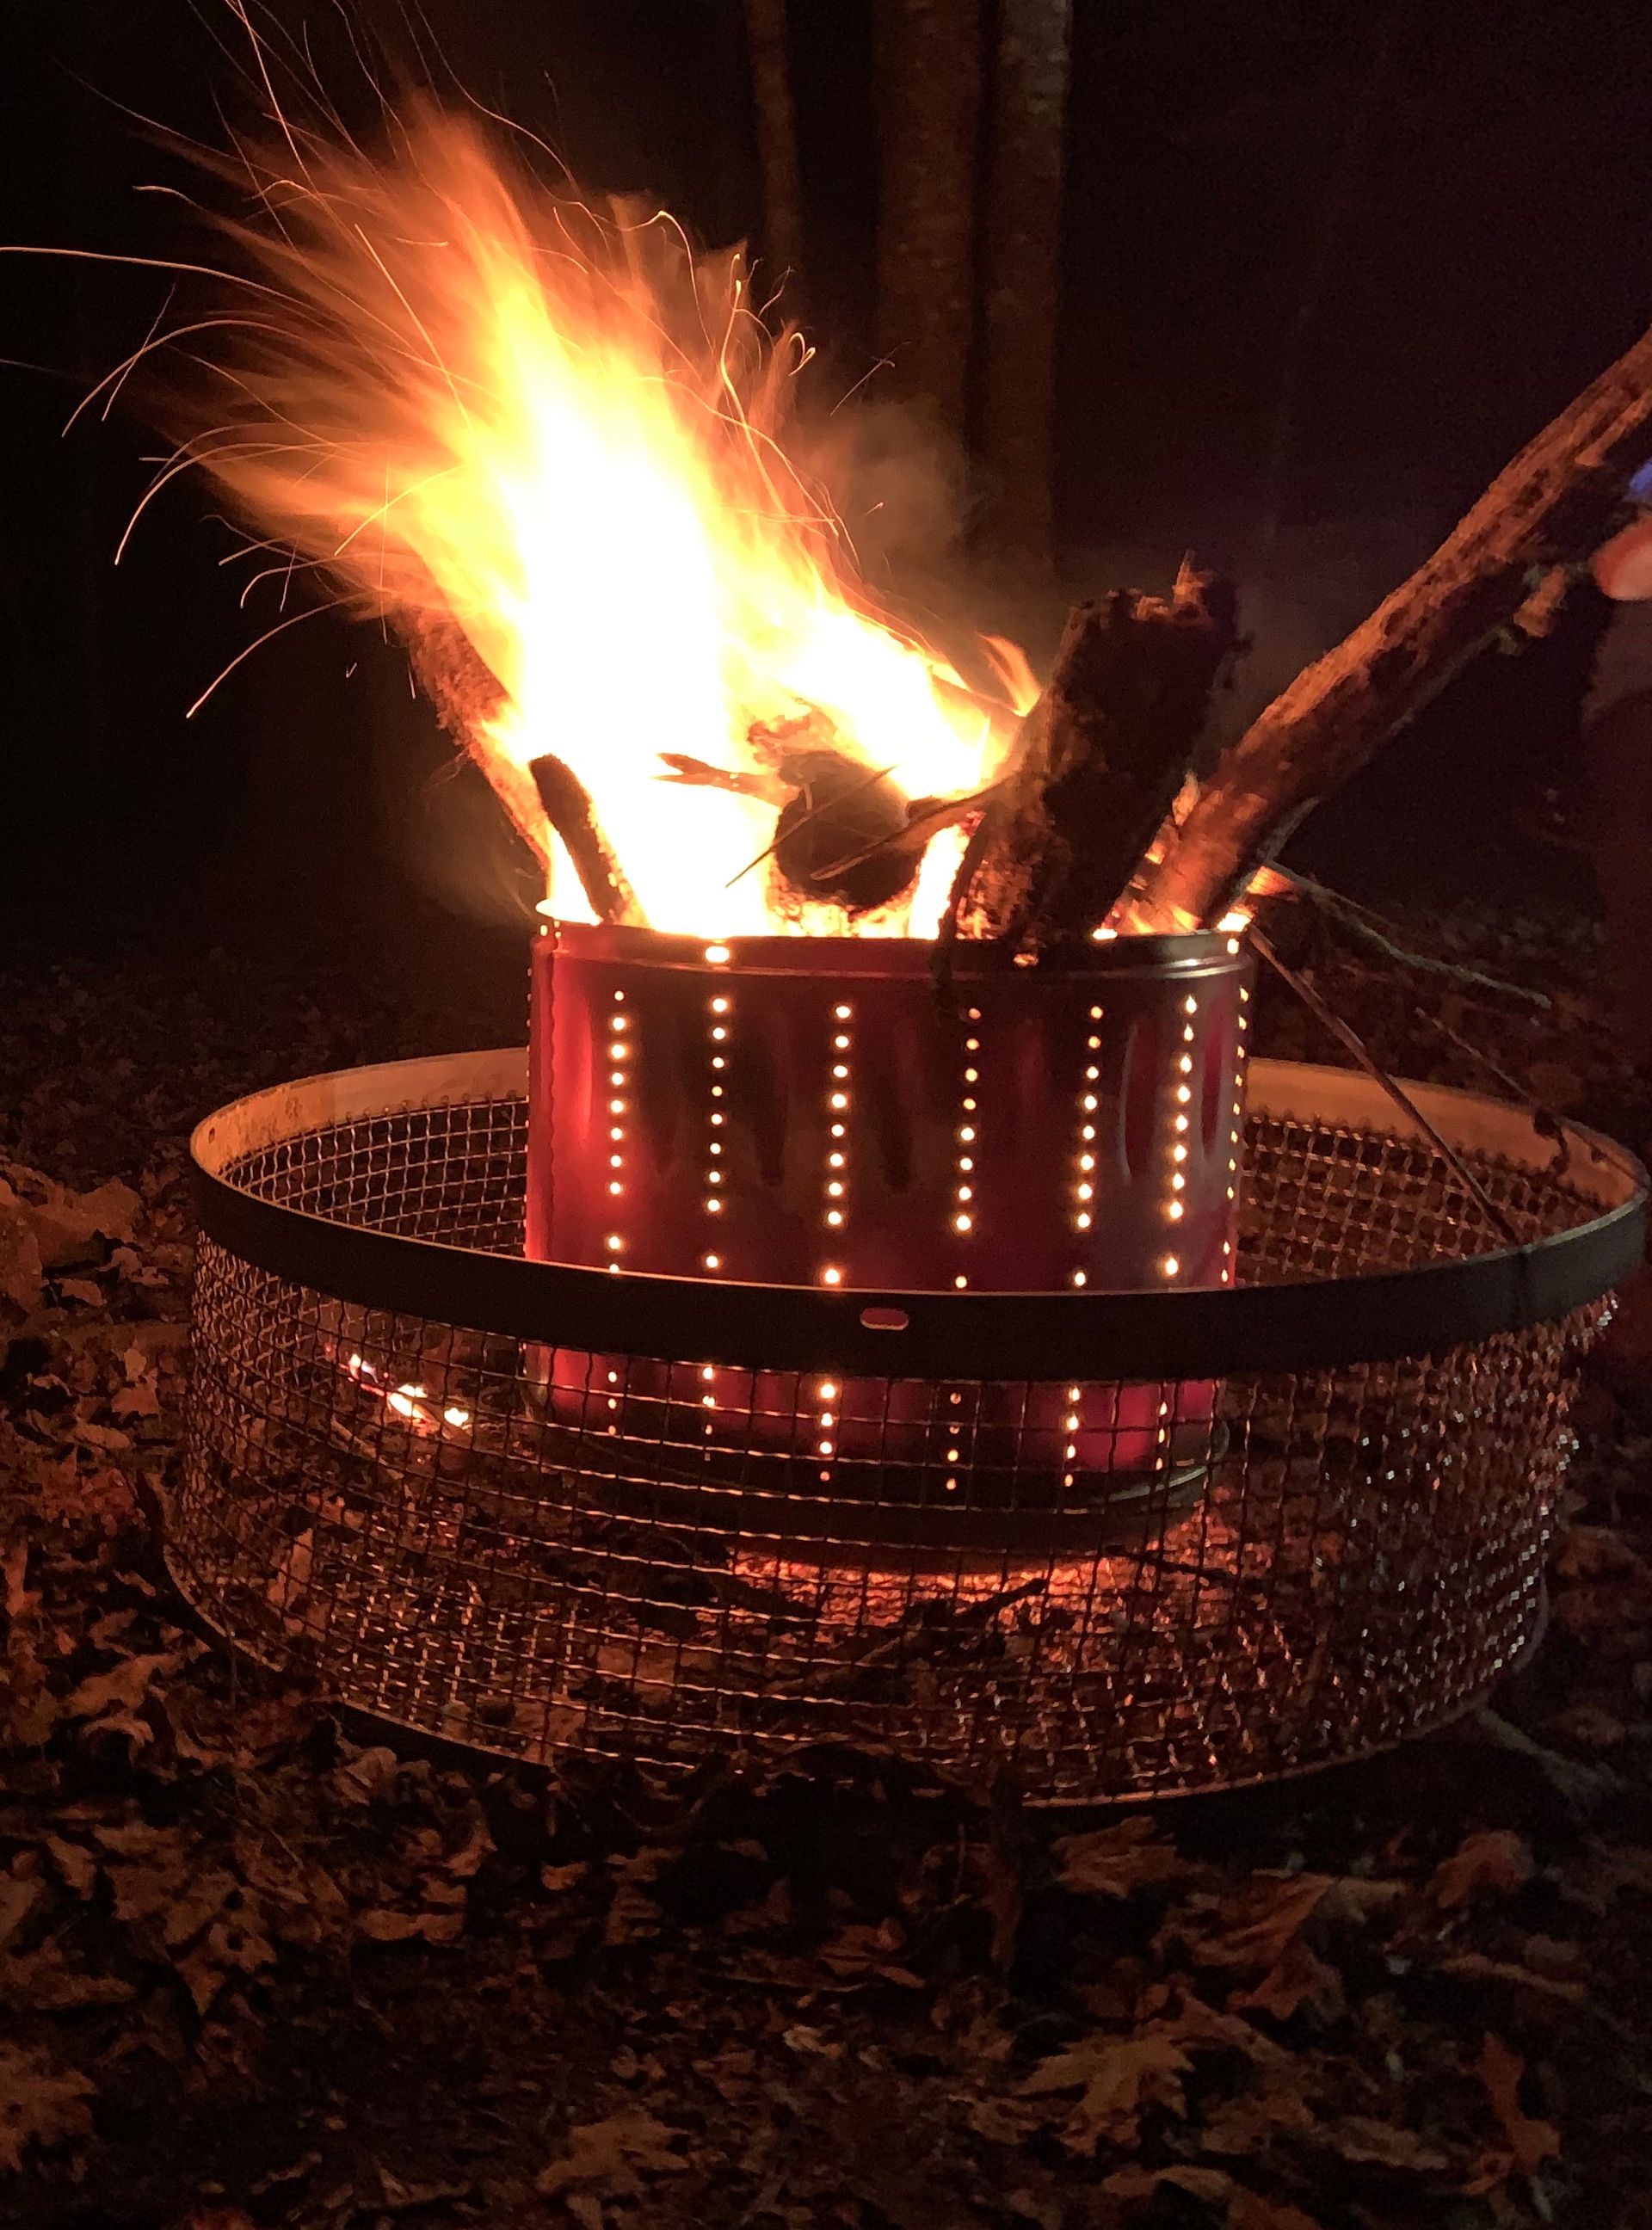 A fire is being lit in a can with sparks coming out of it